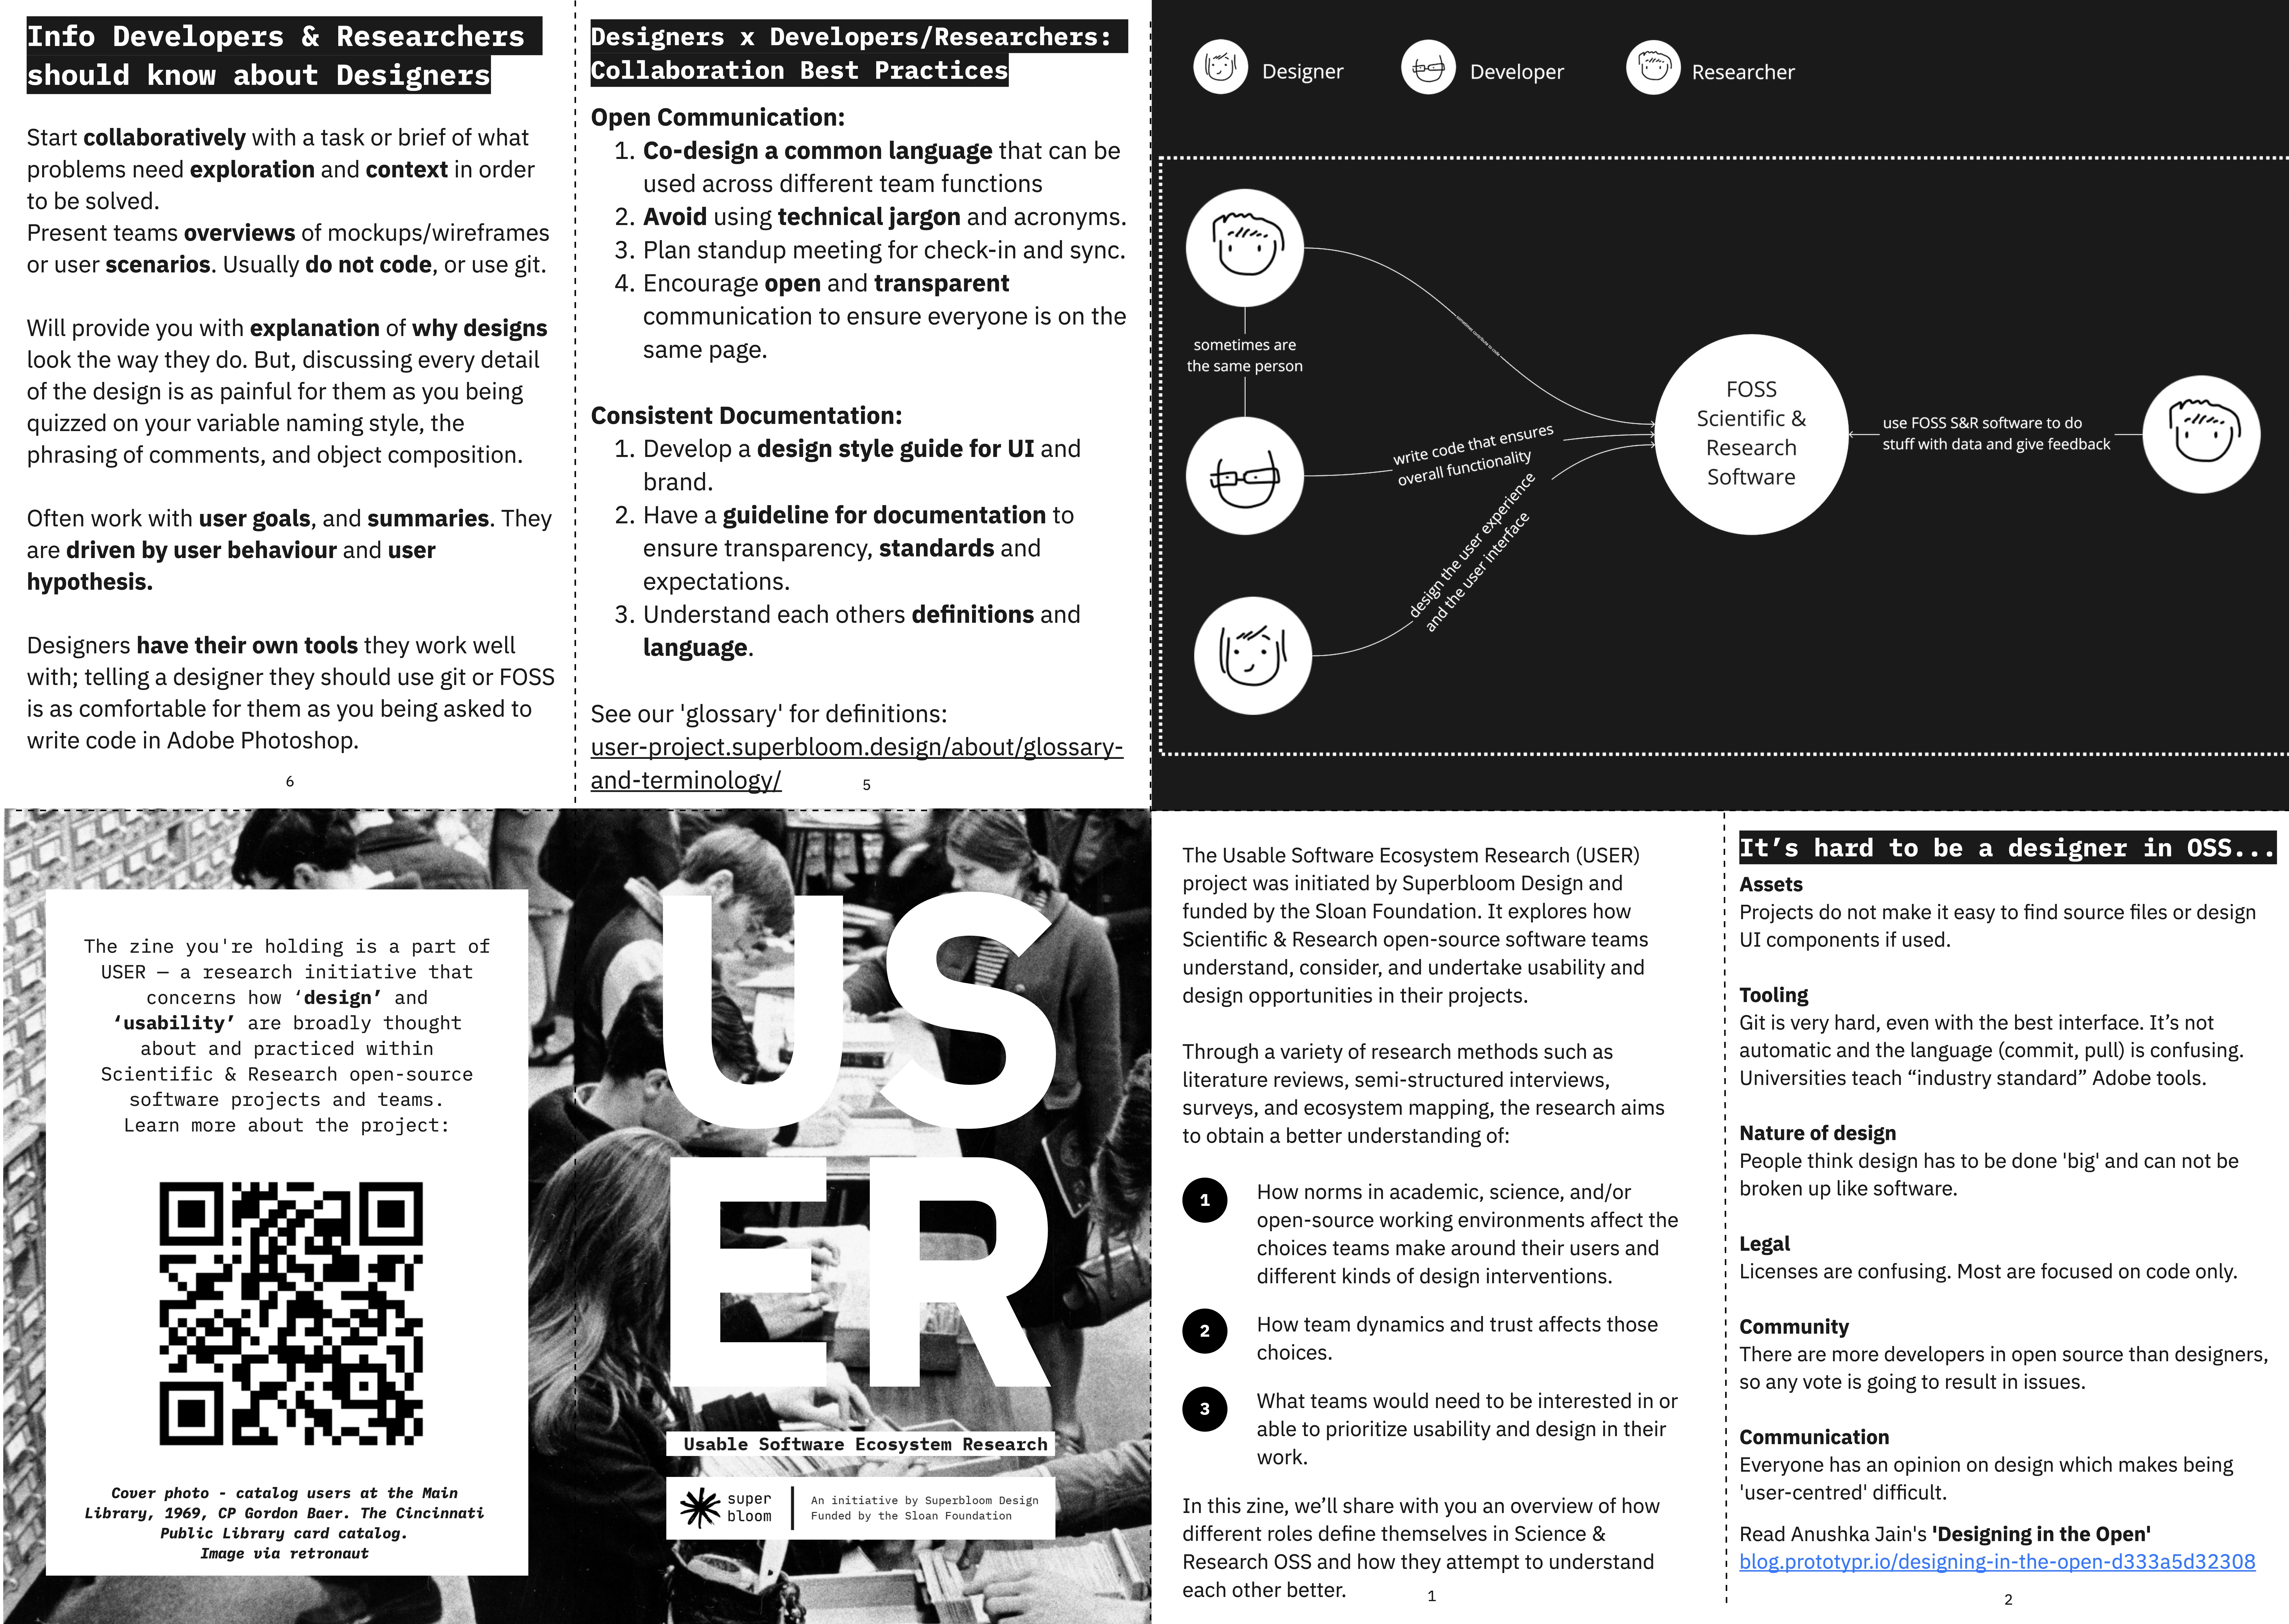 Zine 2.3: Information Developers and Researchers should know about Designers